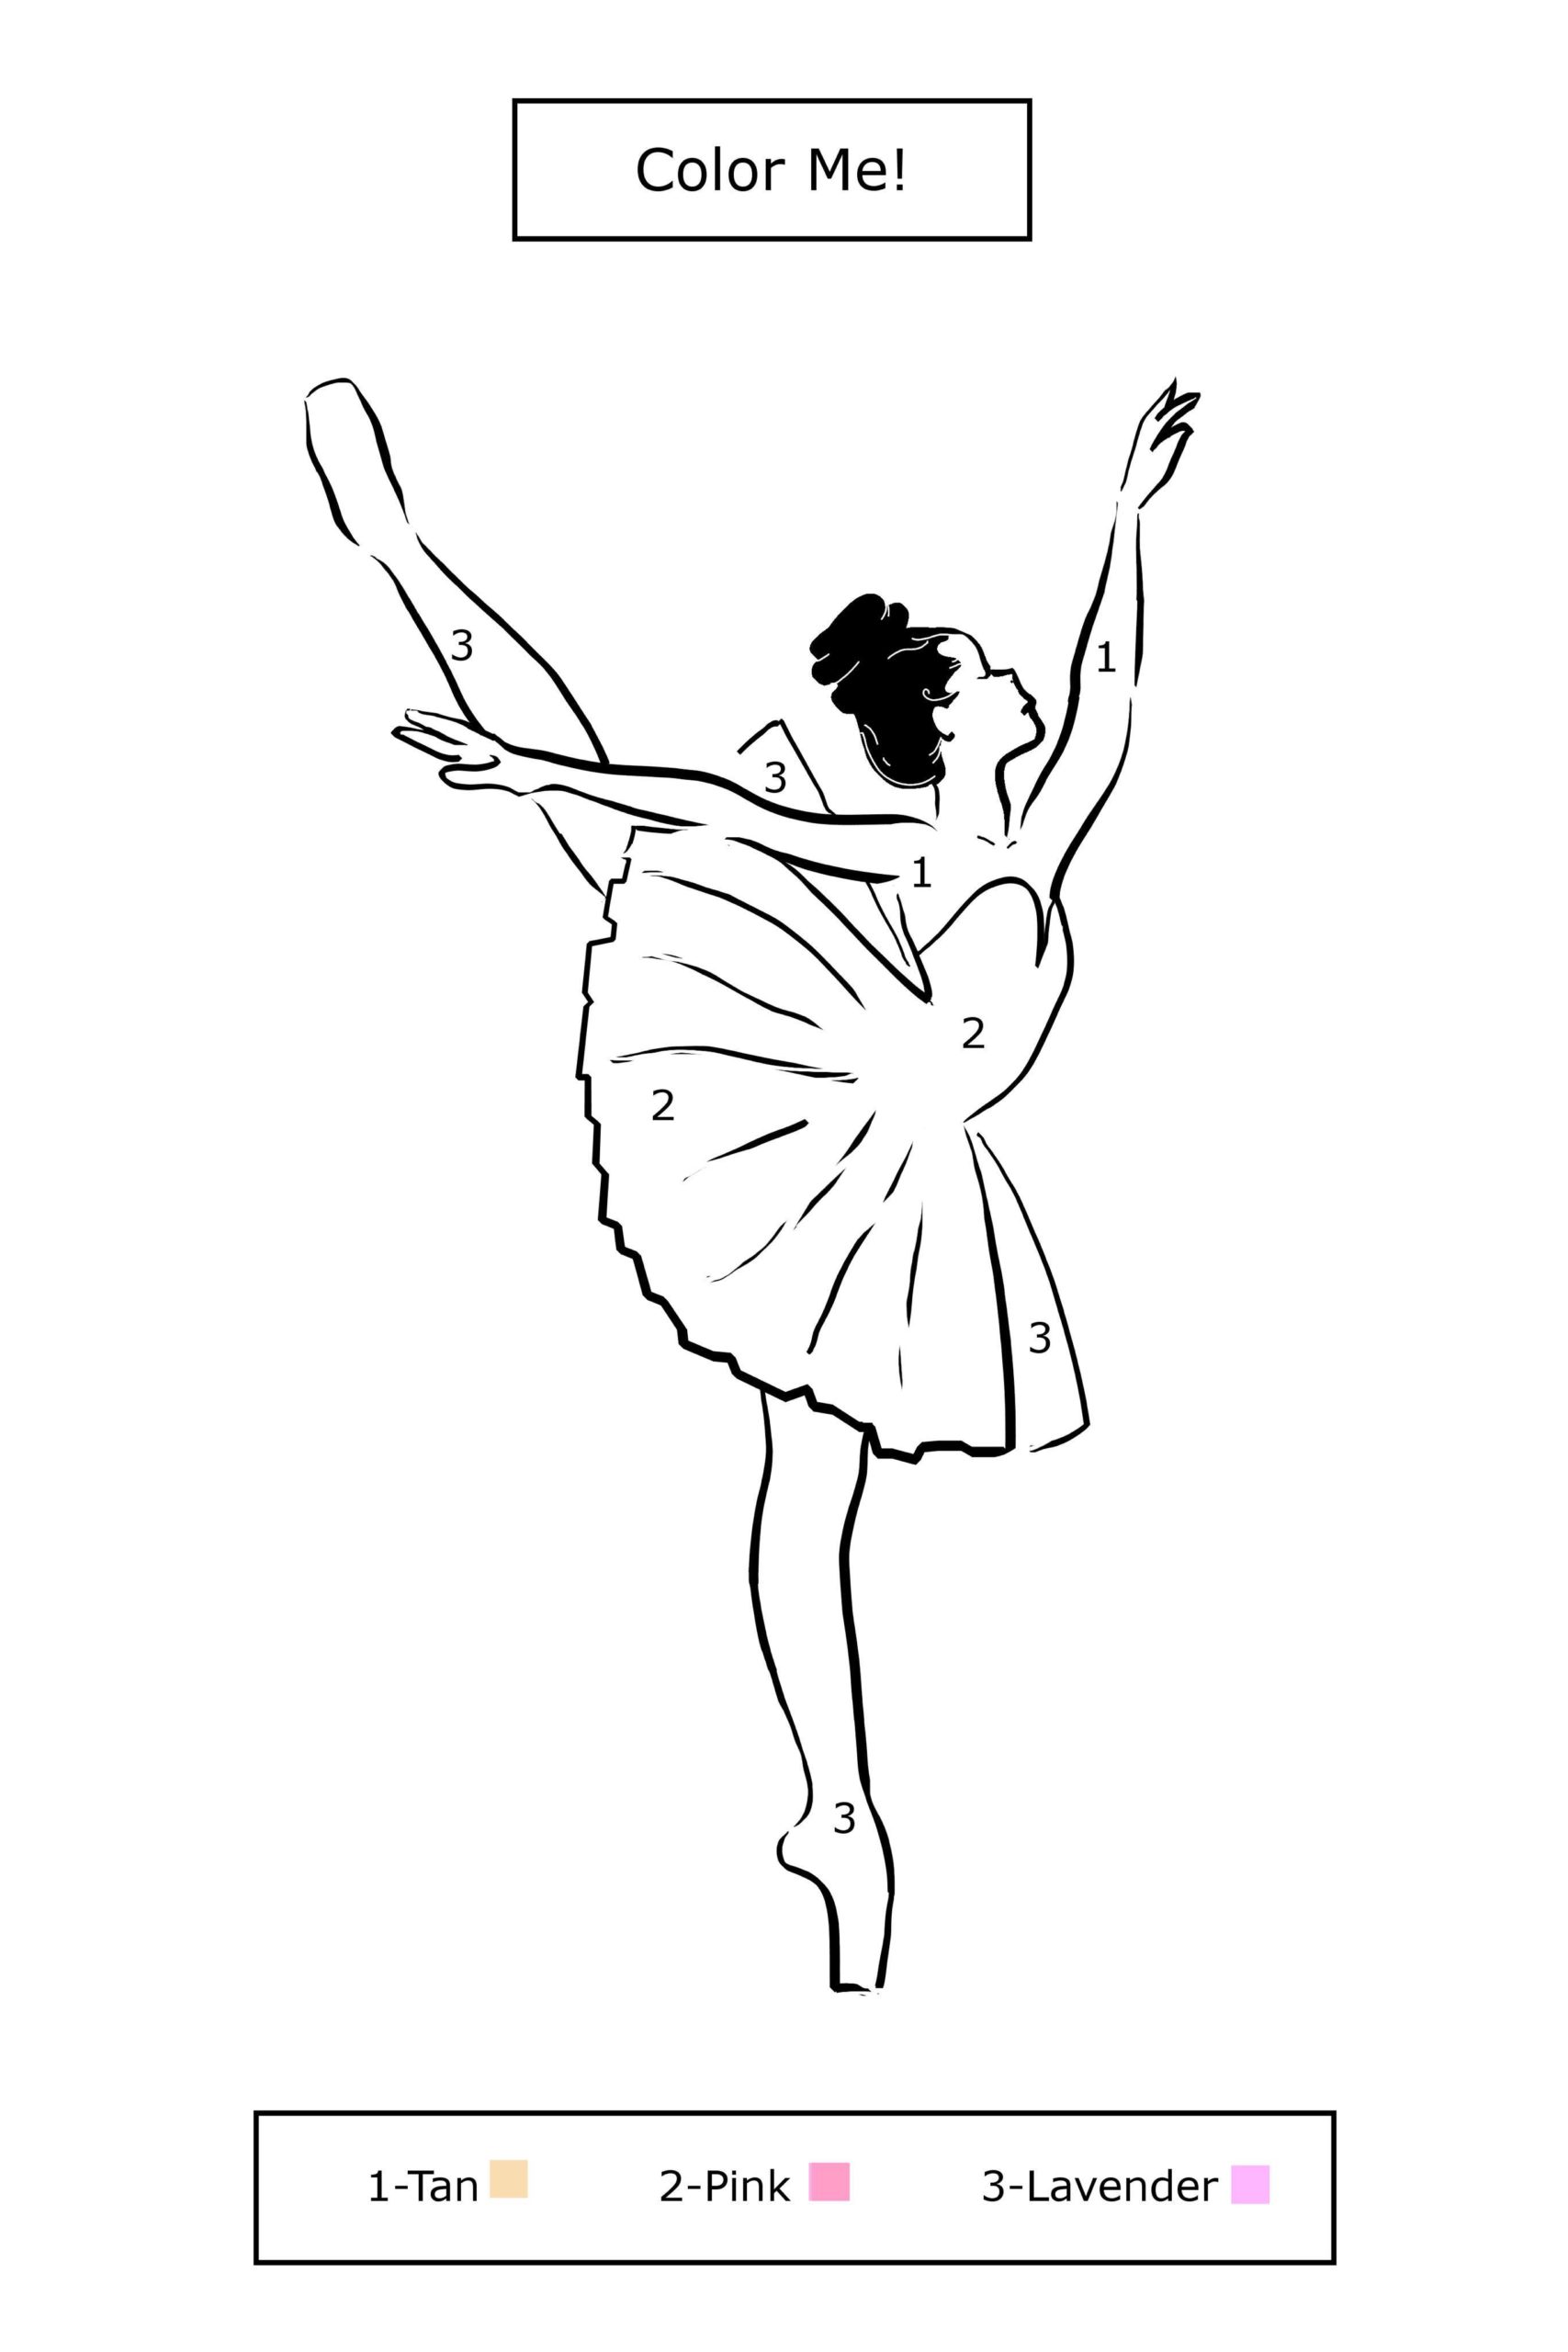 Ballerina coloring sheets pack of â coloring books for kidz